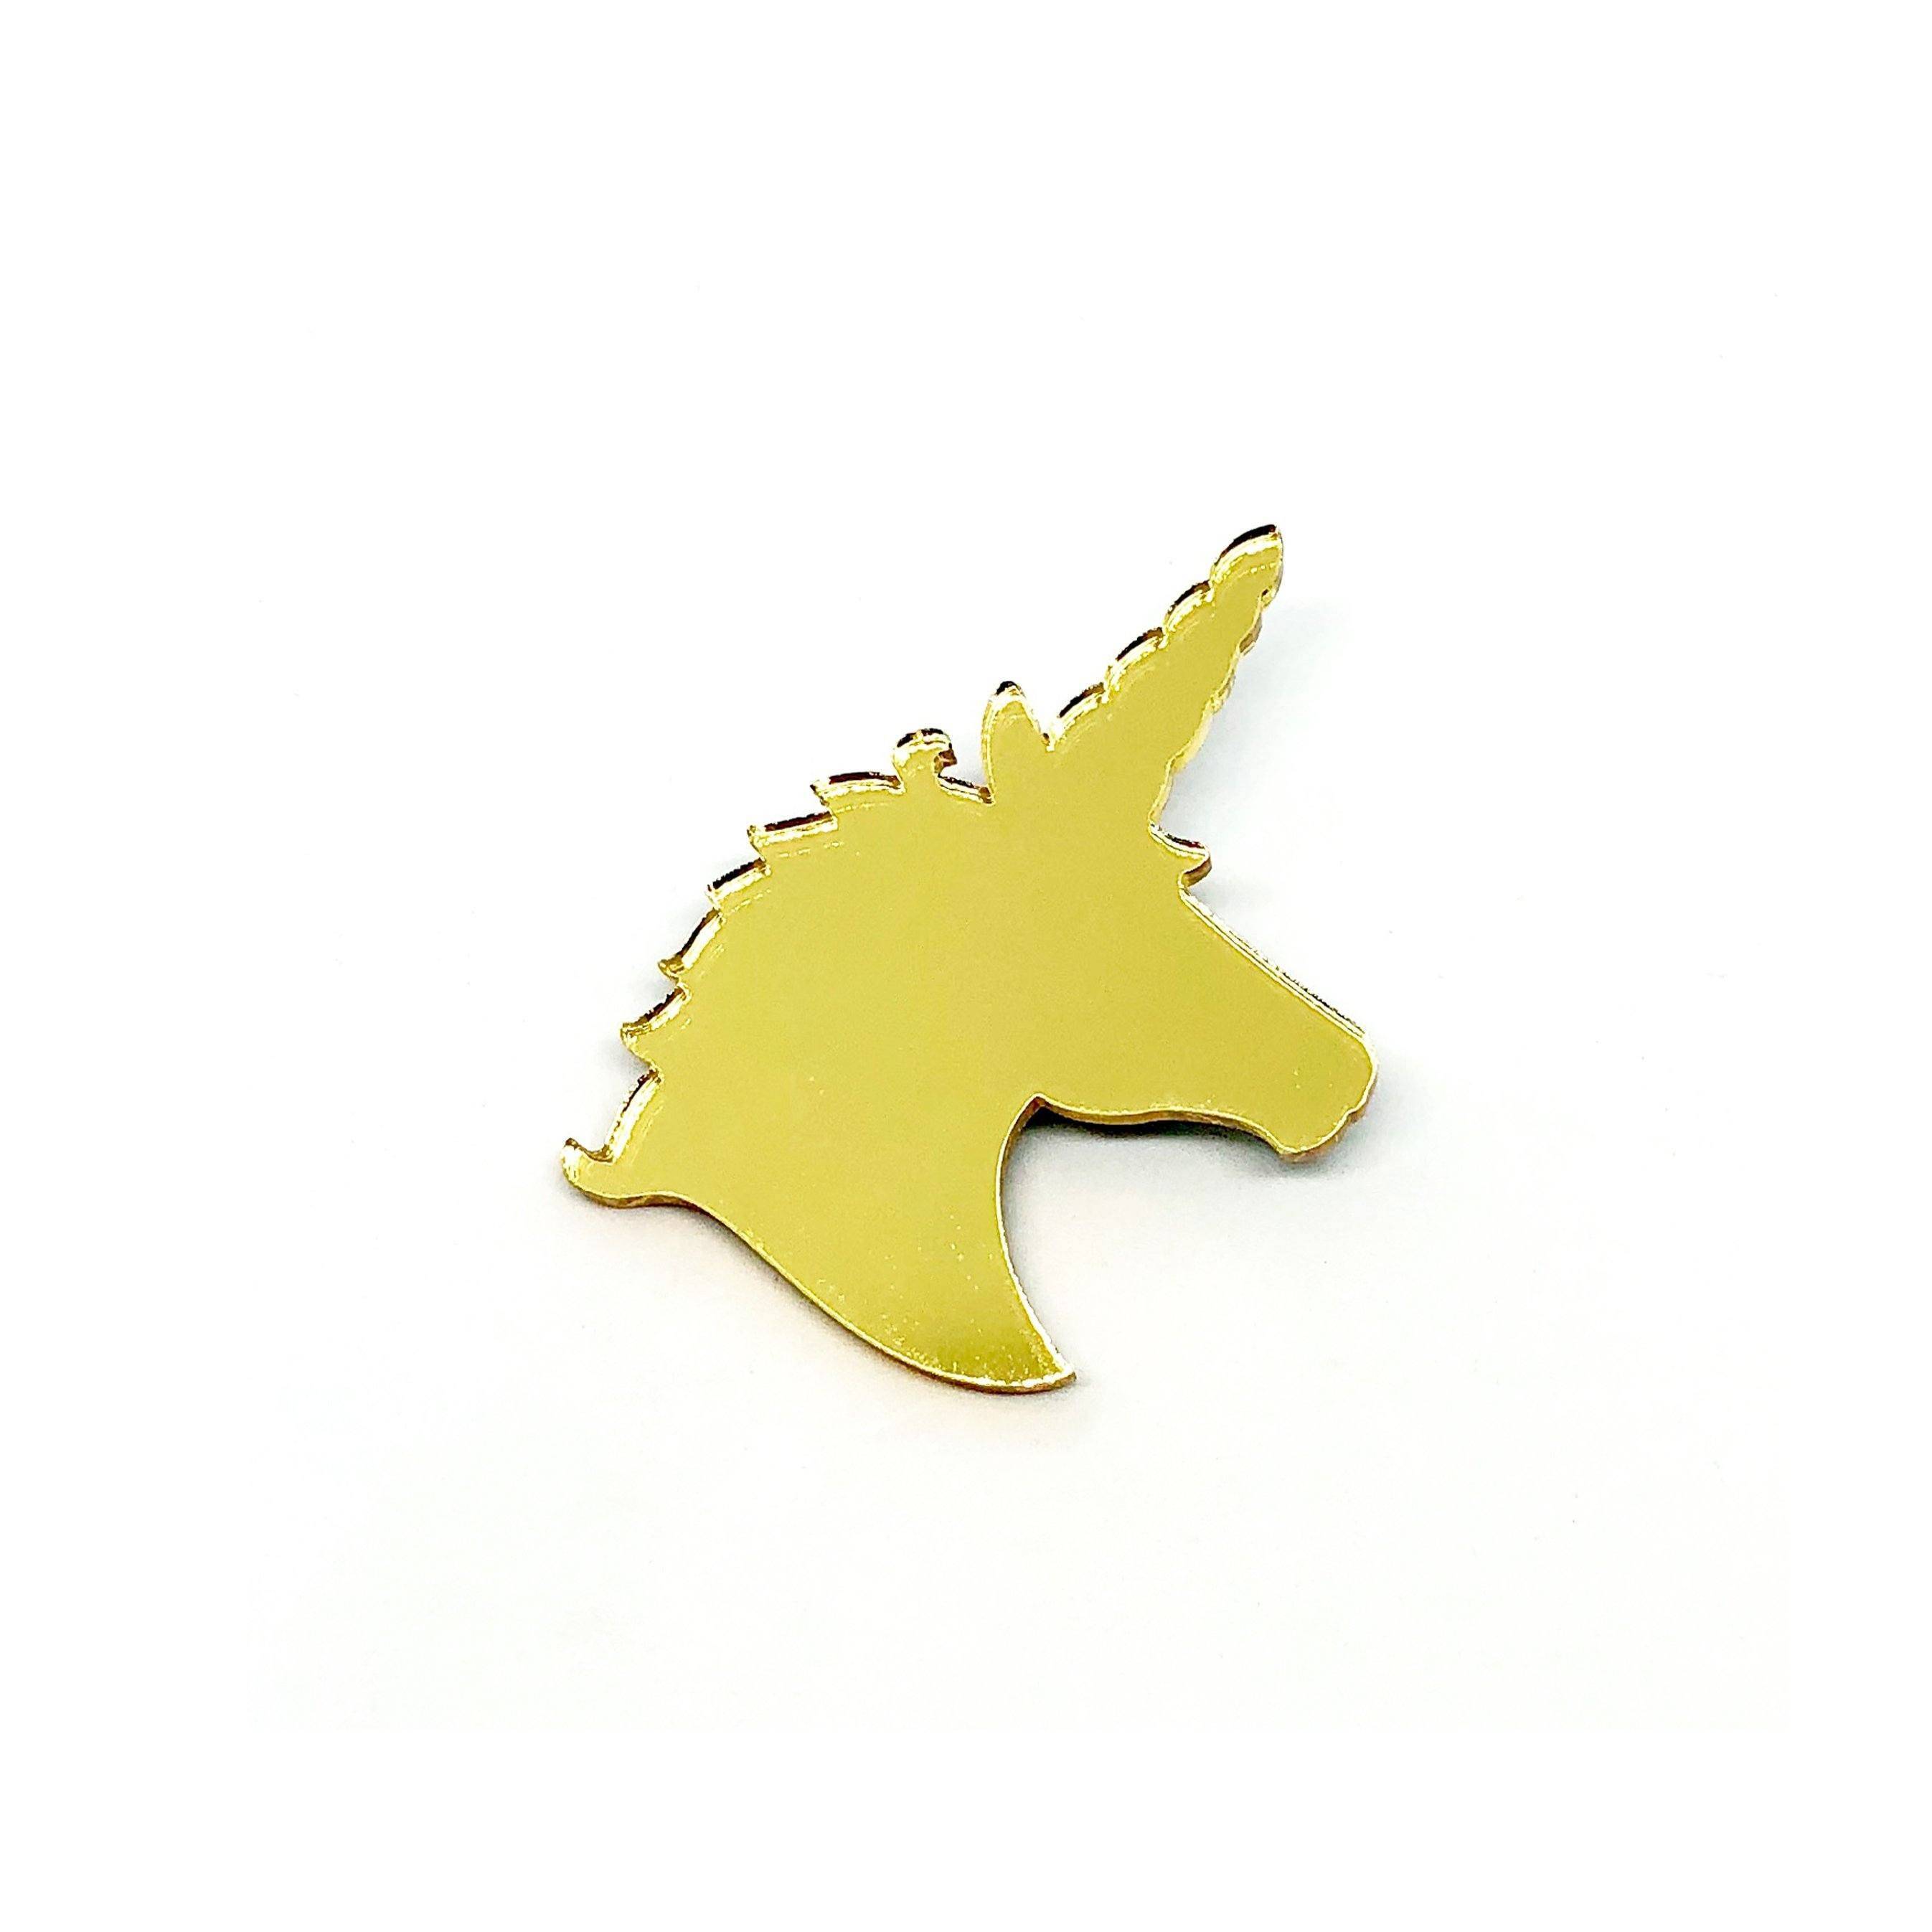 Unicorn Gold Mirror Laser Cut Acrylic Brooch Pin - Brooches - Paperdaise Accessories - Naiise